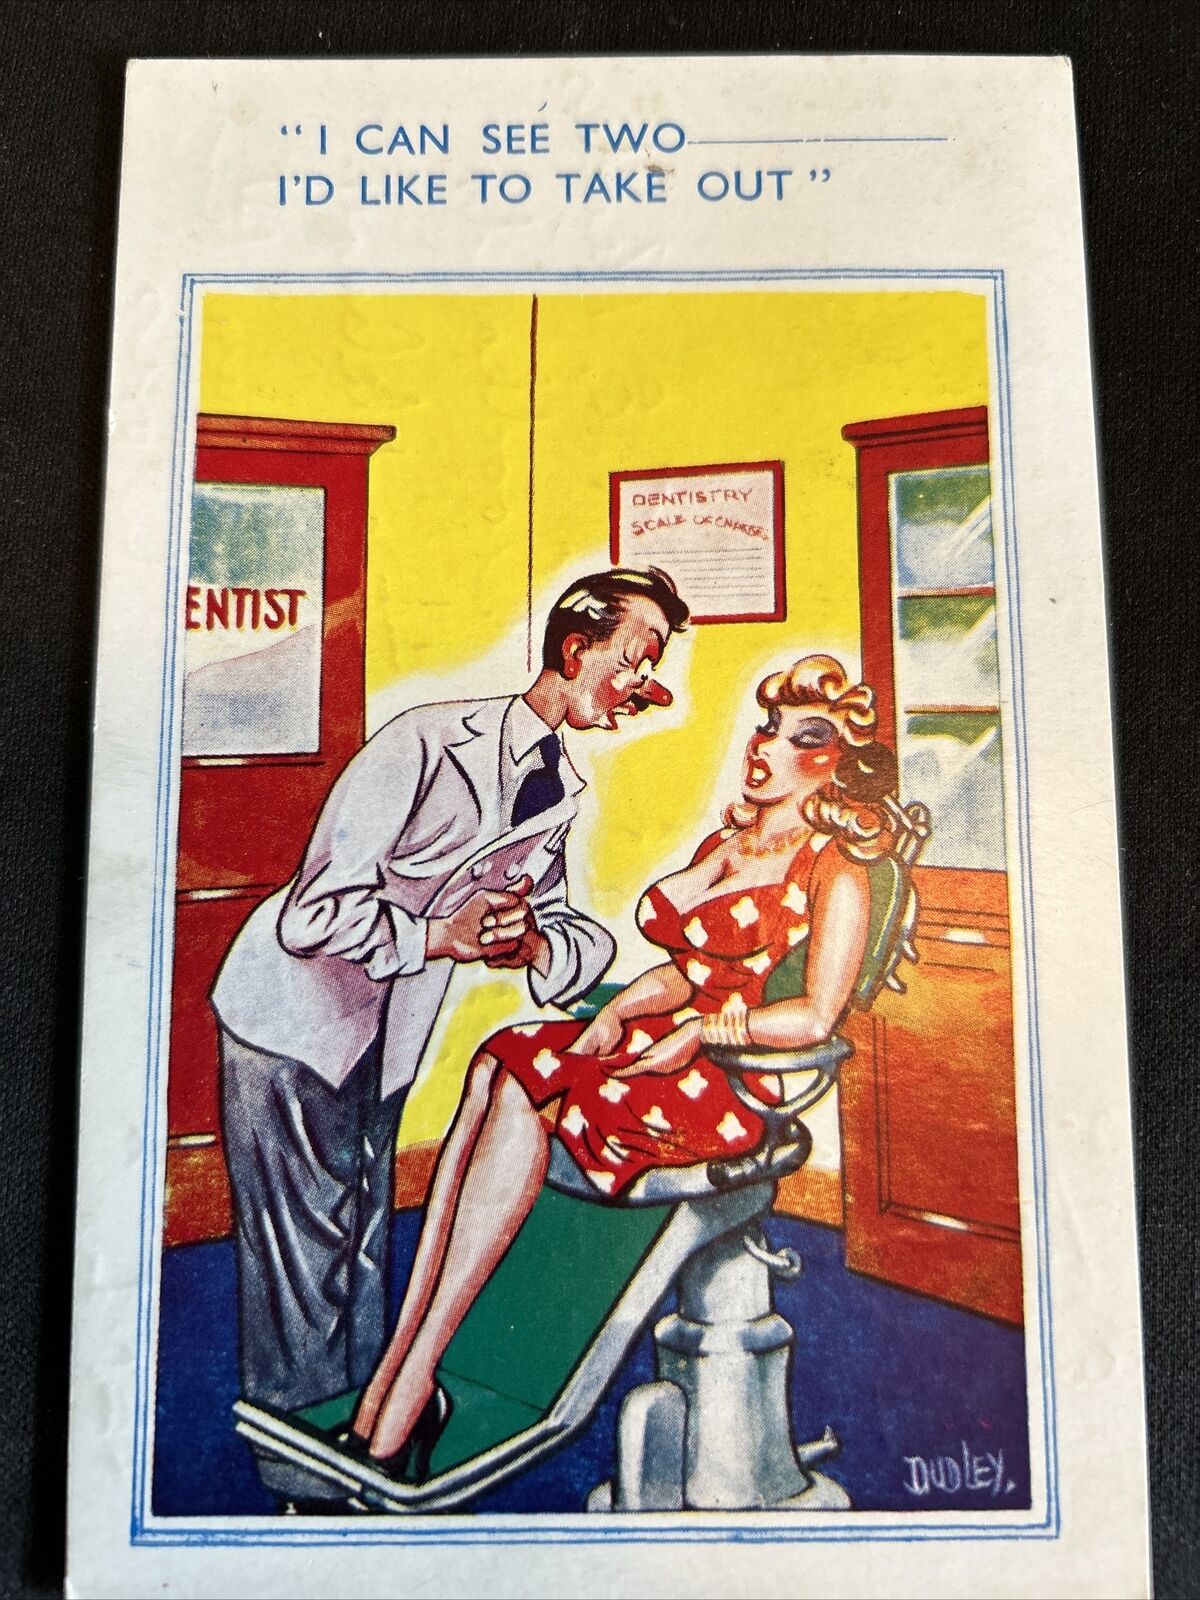 Comedic Naughty Dentist 1959 Postcard Comicard by Dudley